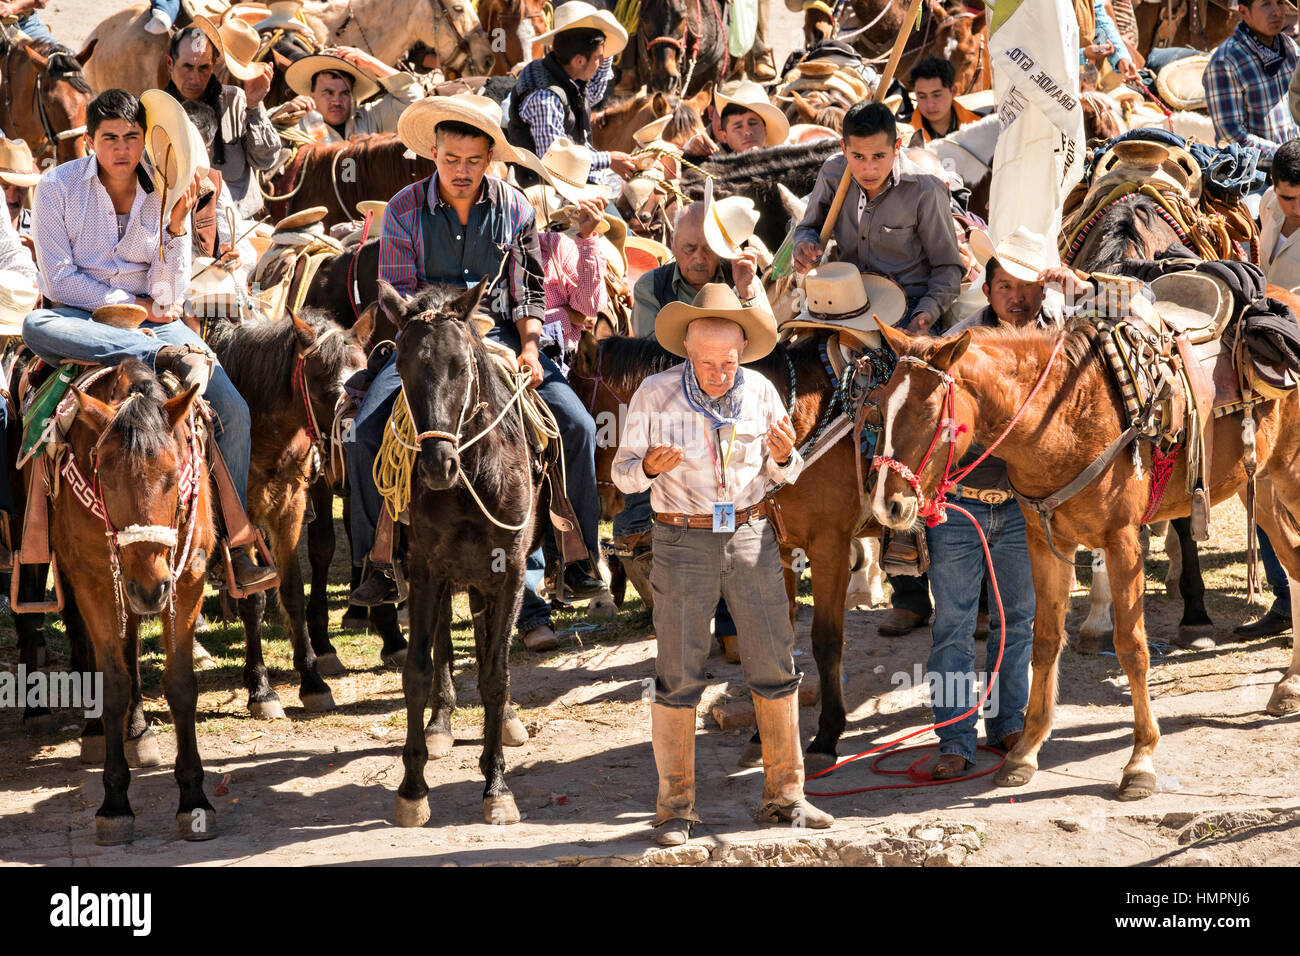 Mexican cowboys pray during Catholic mass at the San Martin de Terreros church during the annual Cabalgata de Cristo Rey pilgrimage January 4, 2017 in Guanajuato, Mexico. Thousands of Mexican cowboys and horse take part in the three-day ride to the mountaintop shrine of Cristo Rey stopping along the way at shrines and churches. Stock Photo